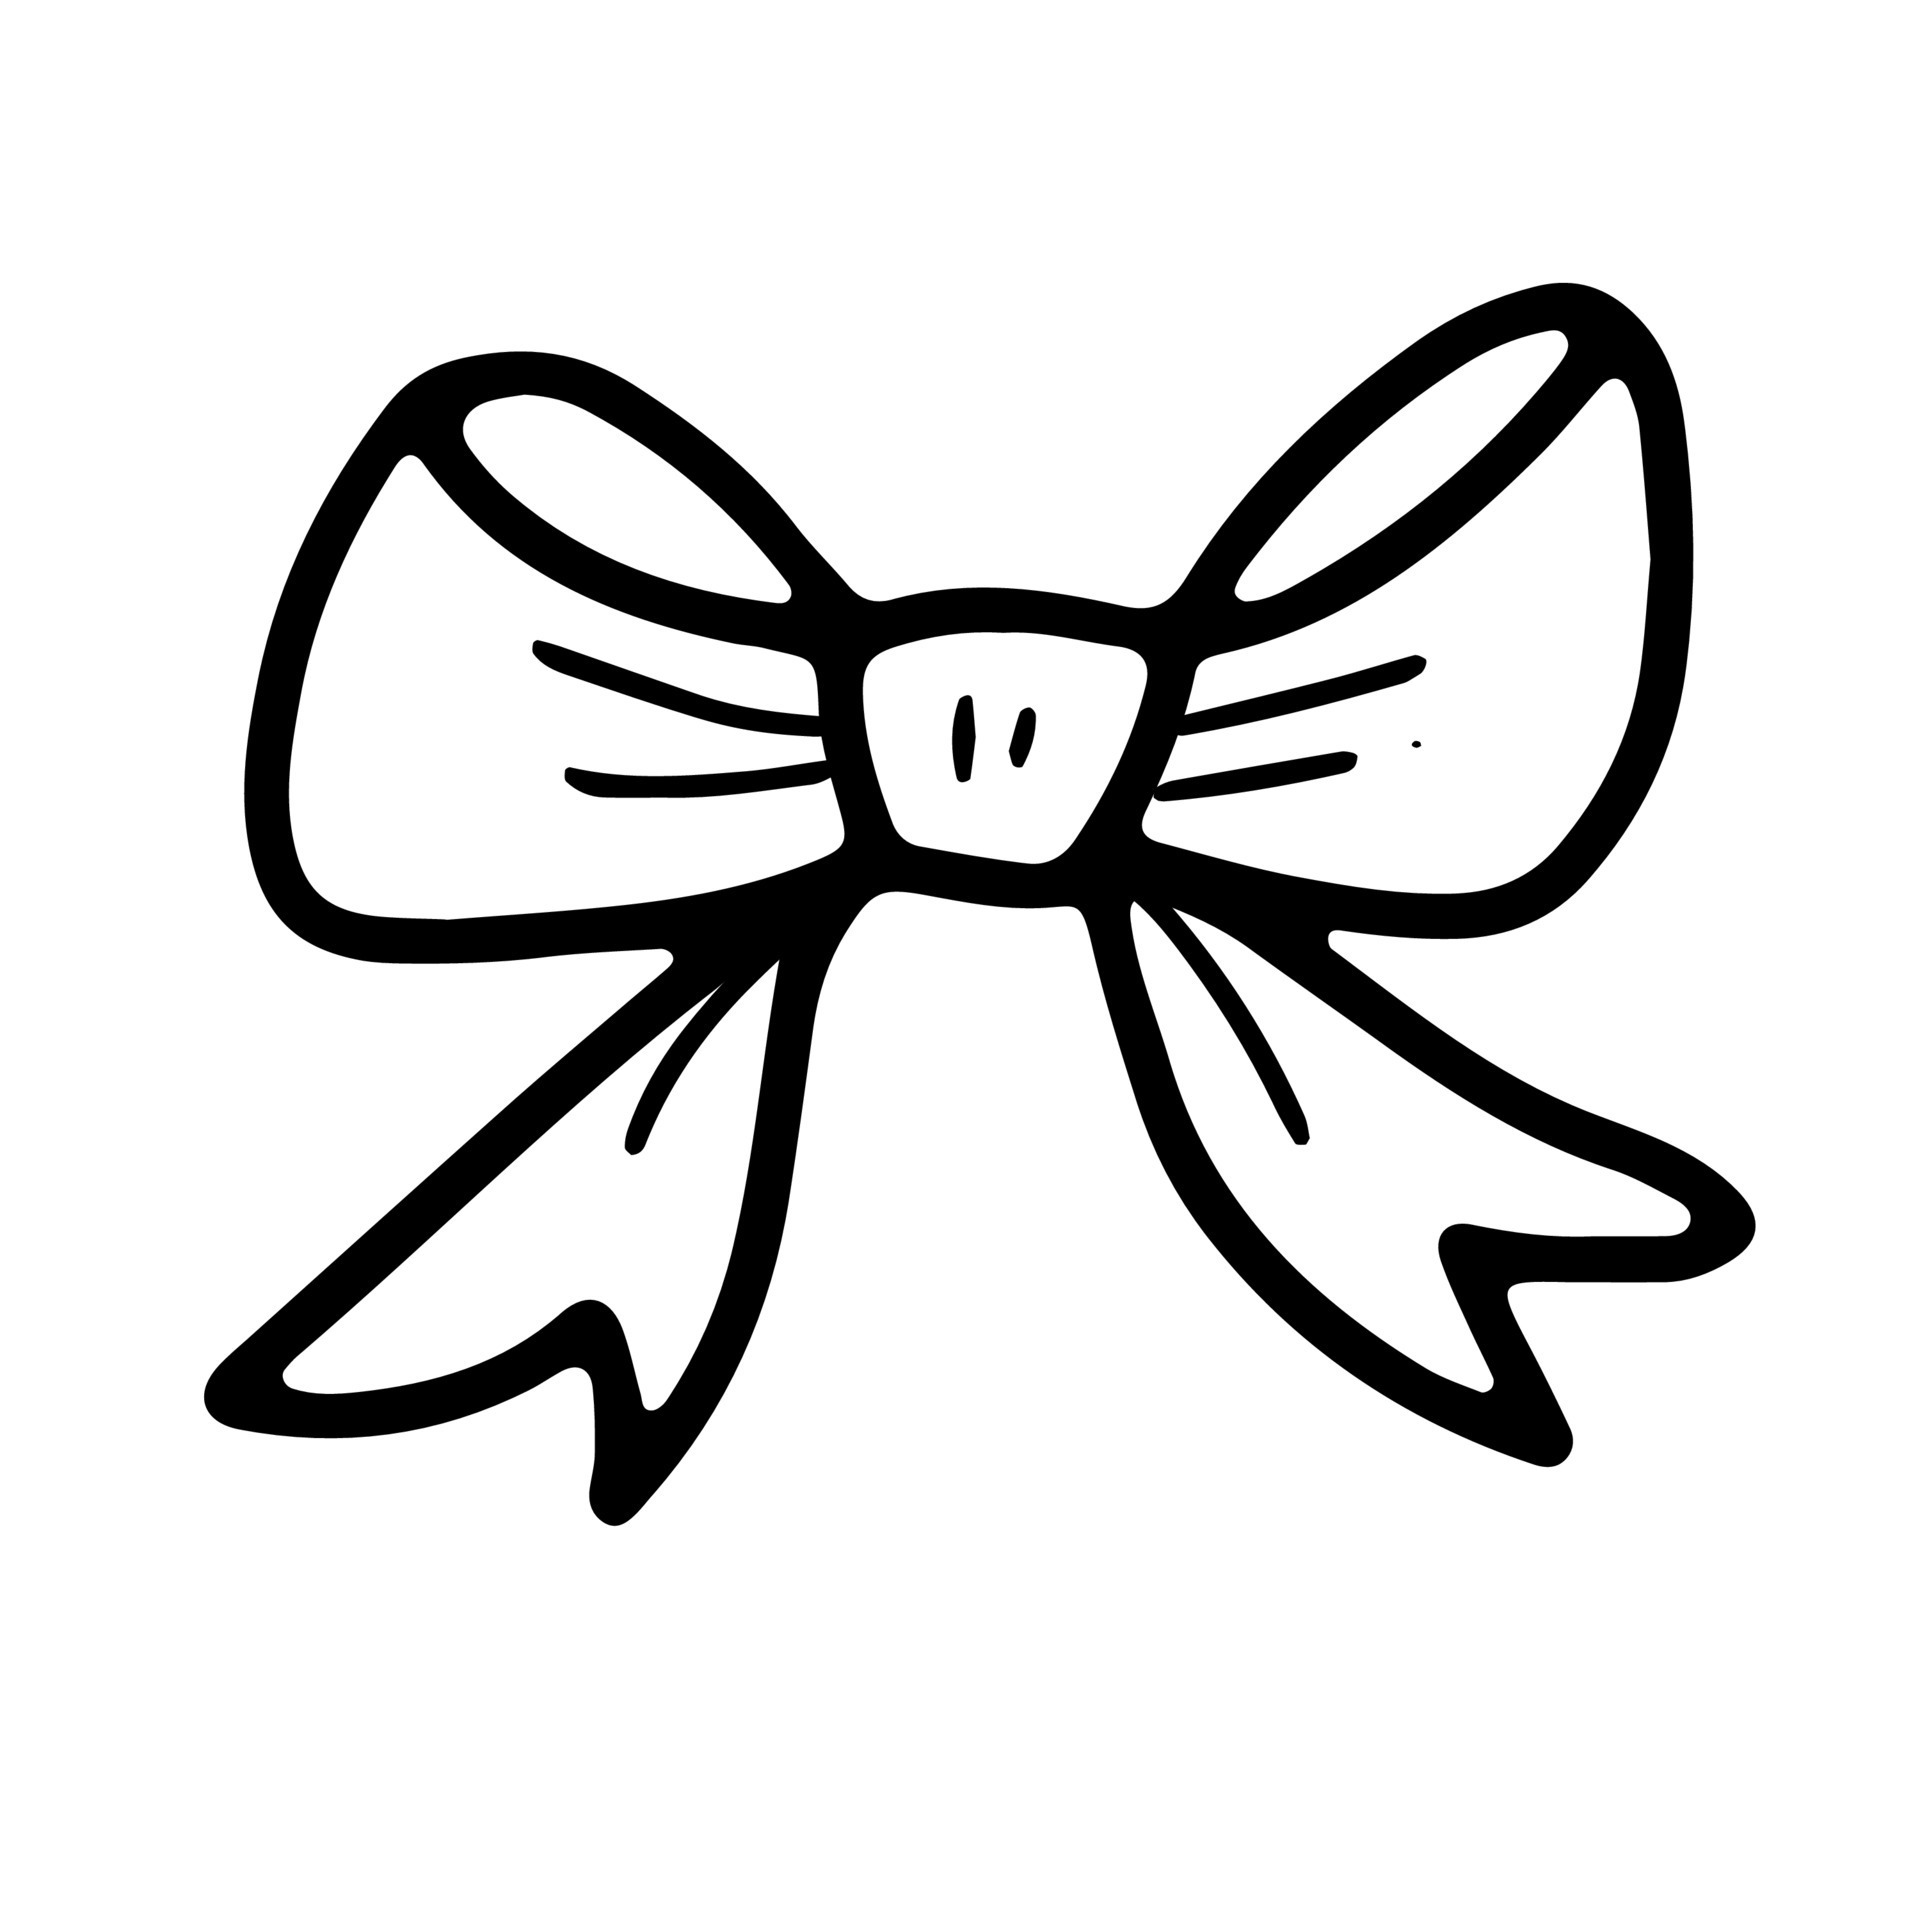 Ribbon bow with black outline doodle style. 11157228 Vector Art at Vecteezy